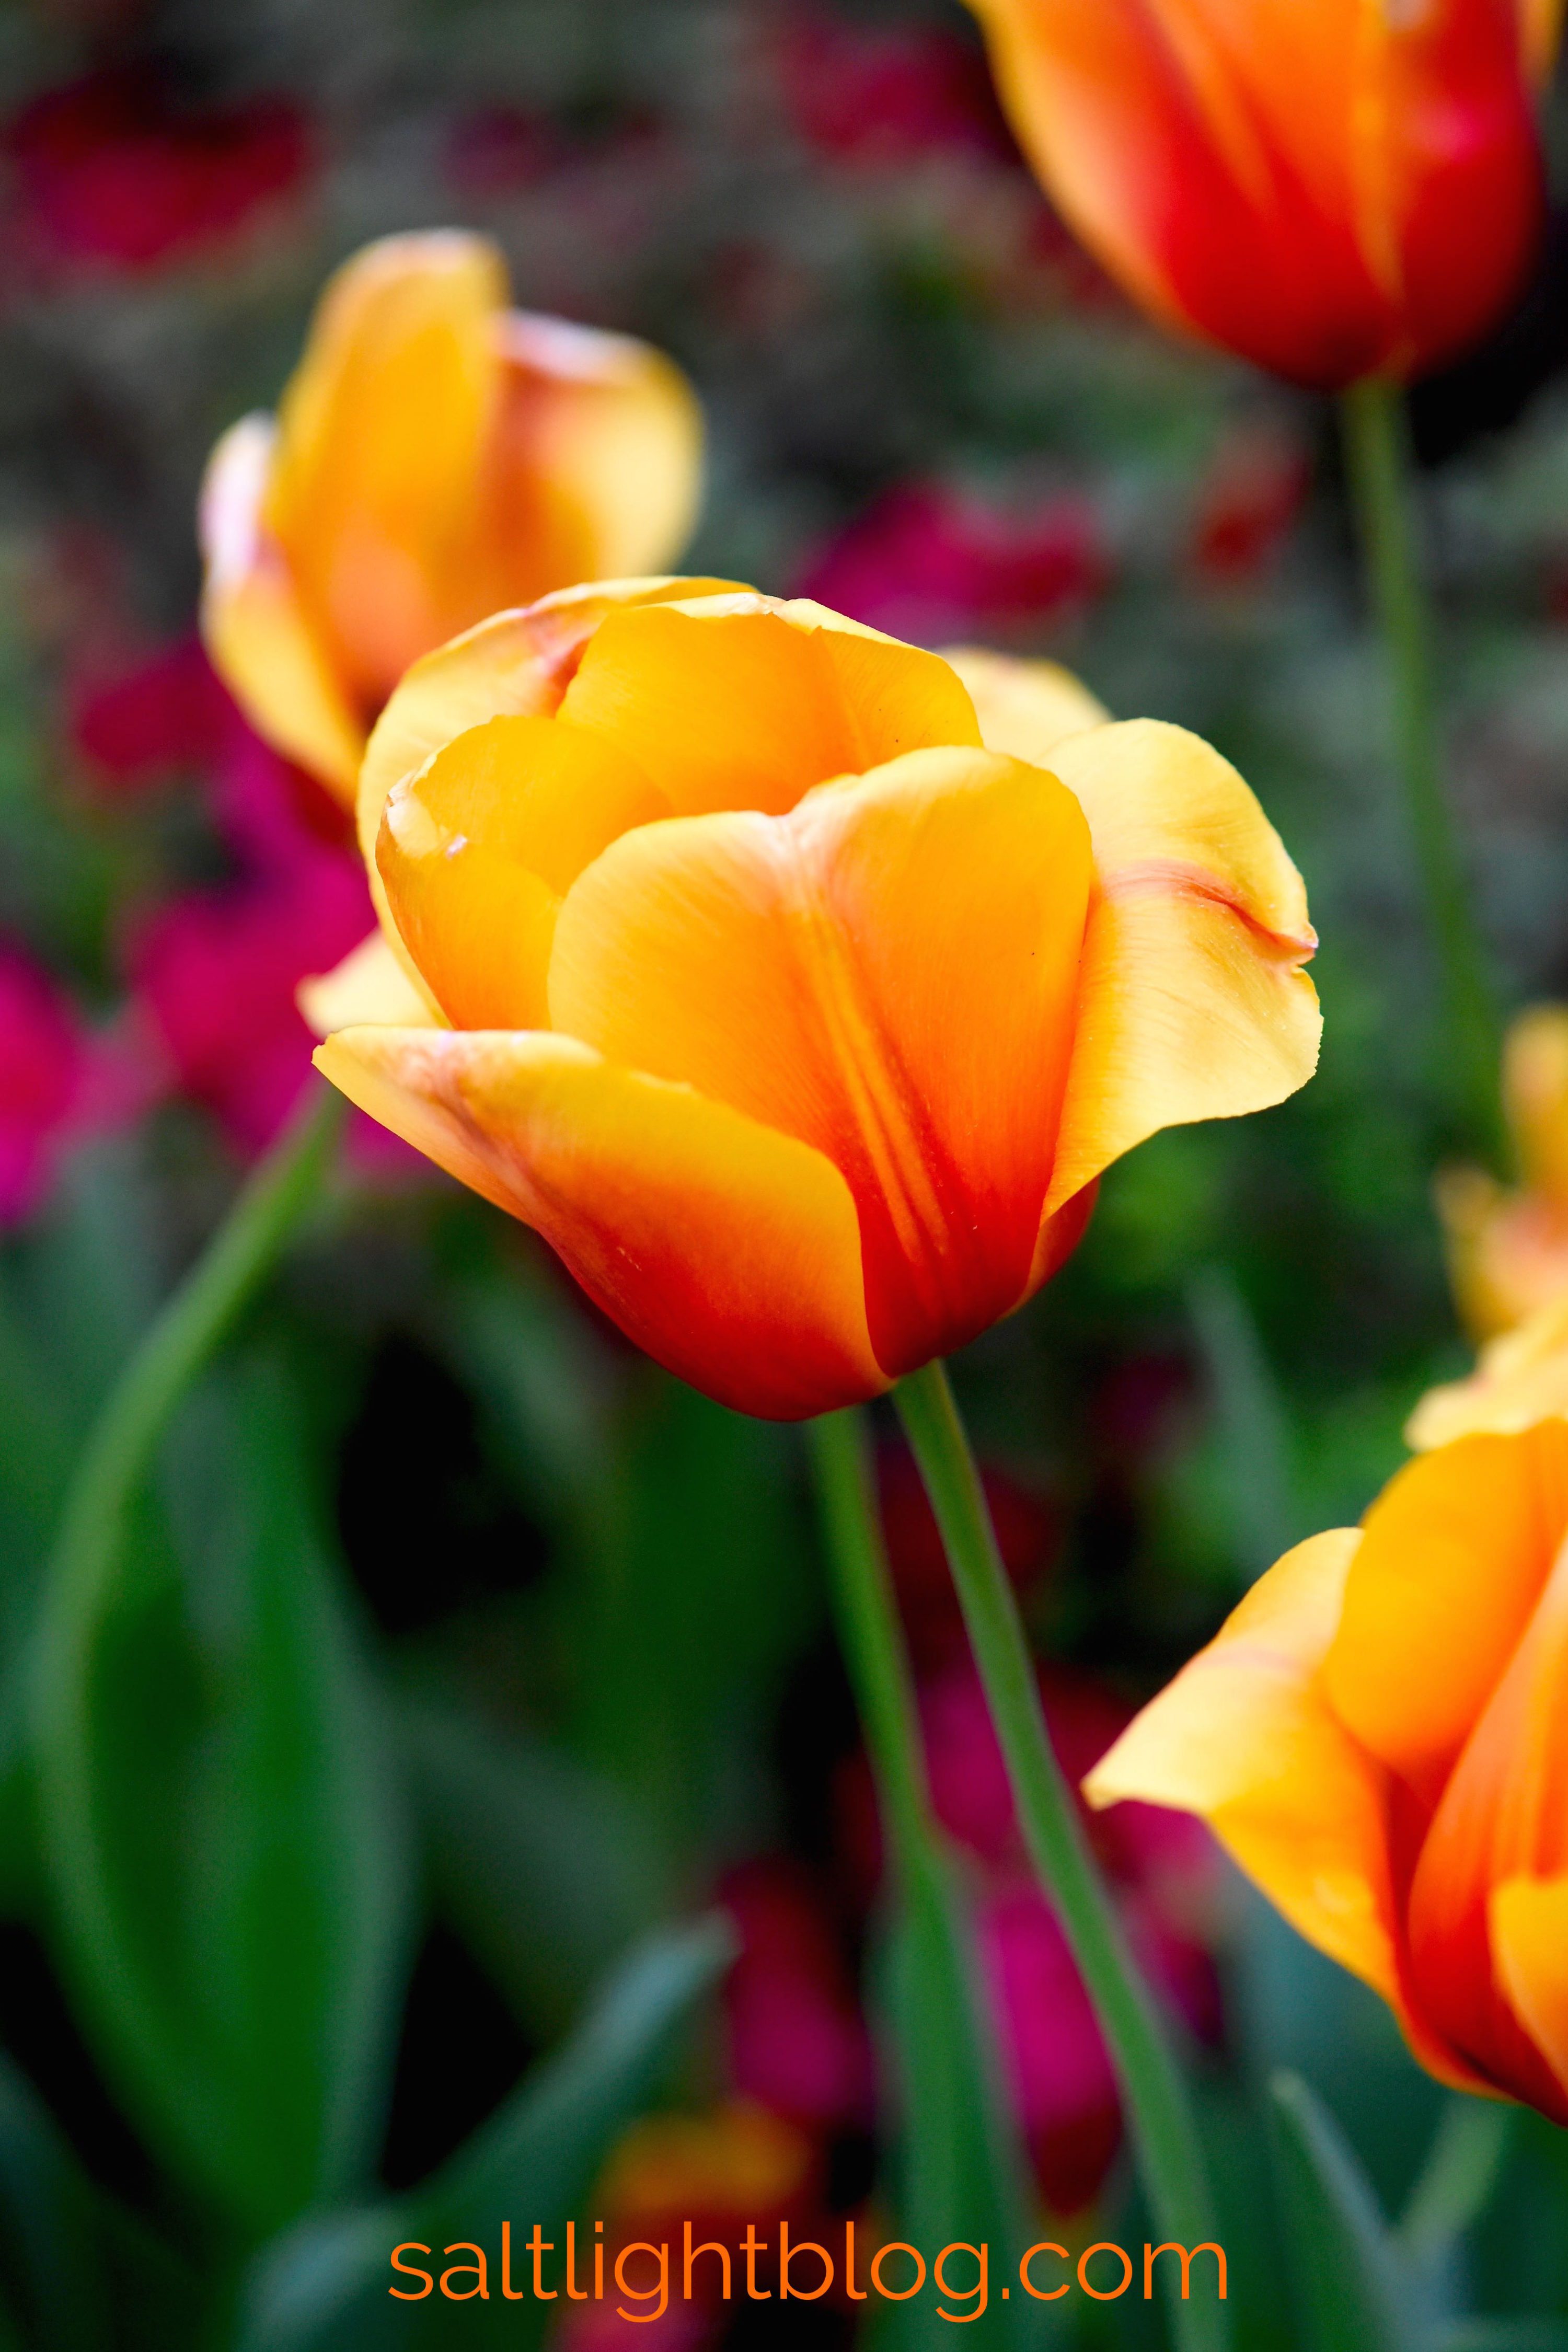 Tulip Cash has large, bold flowersgold and copper with tangerine and raspberry-red flames